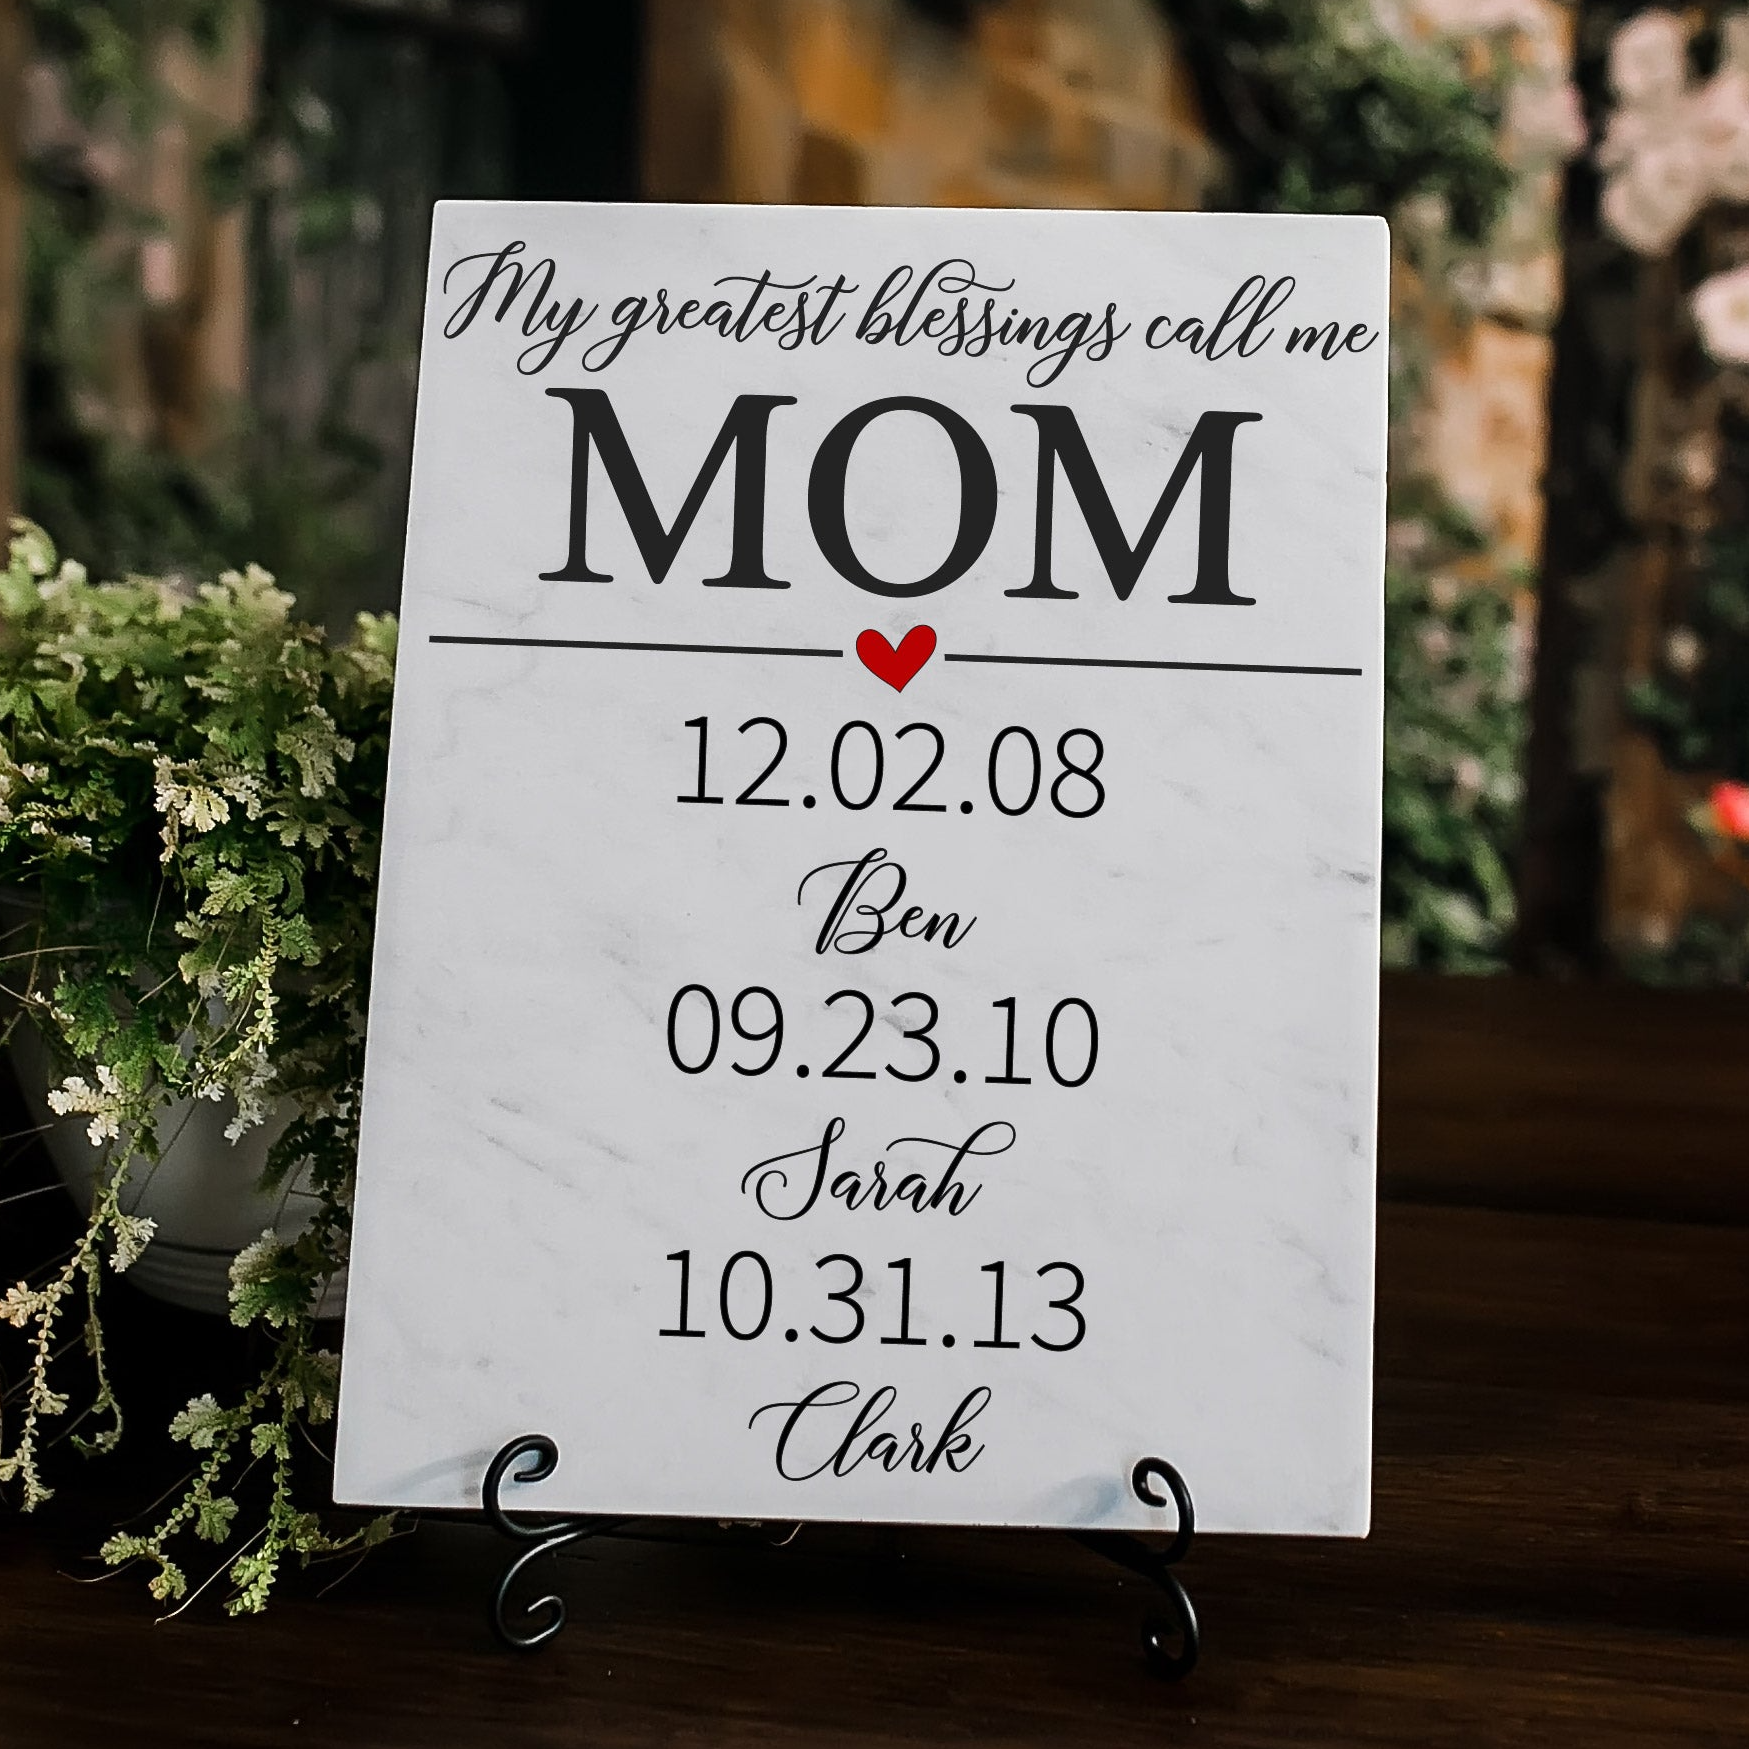 Greatest blessings call me mom sign plaque